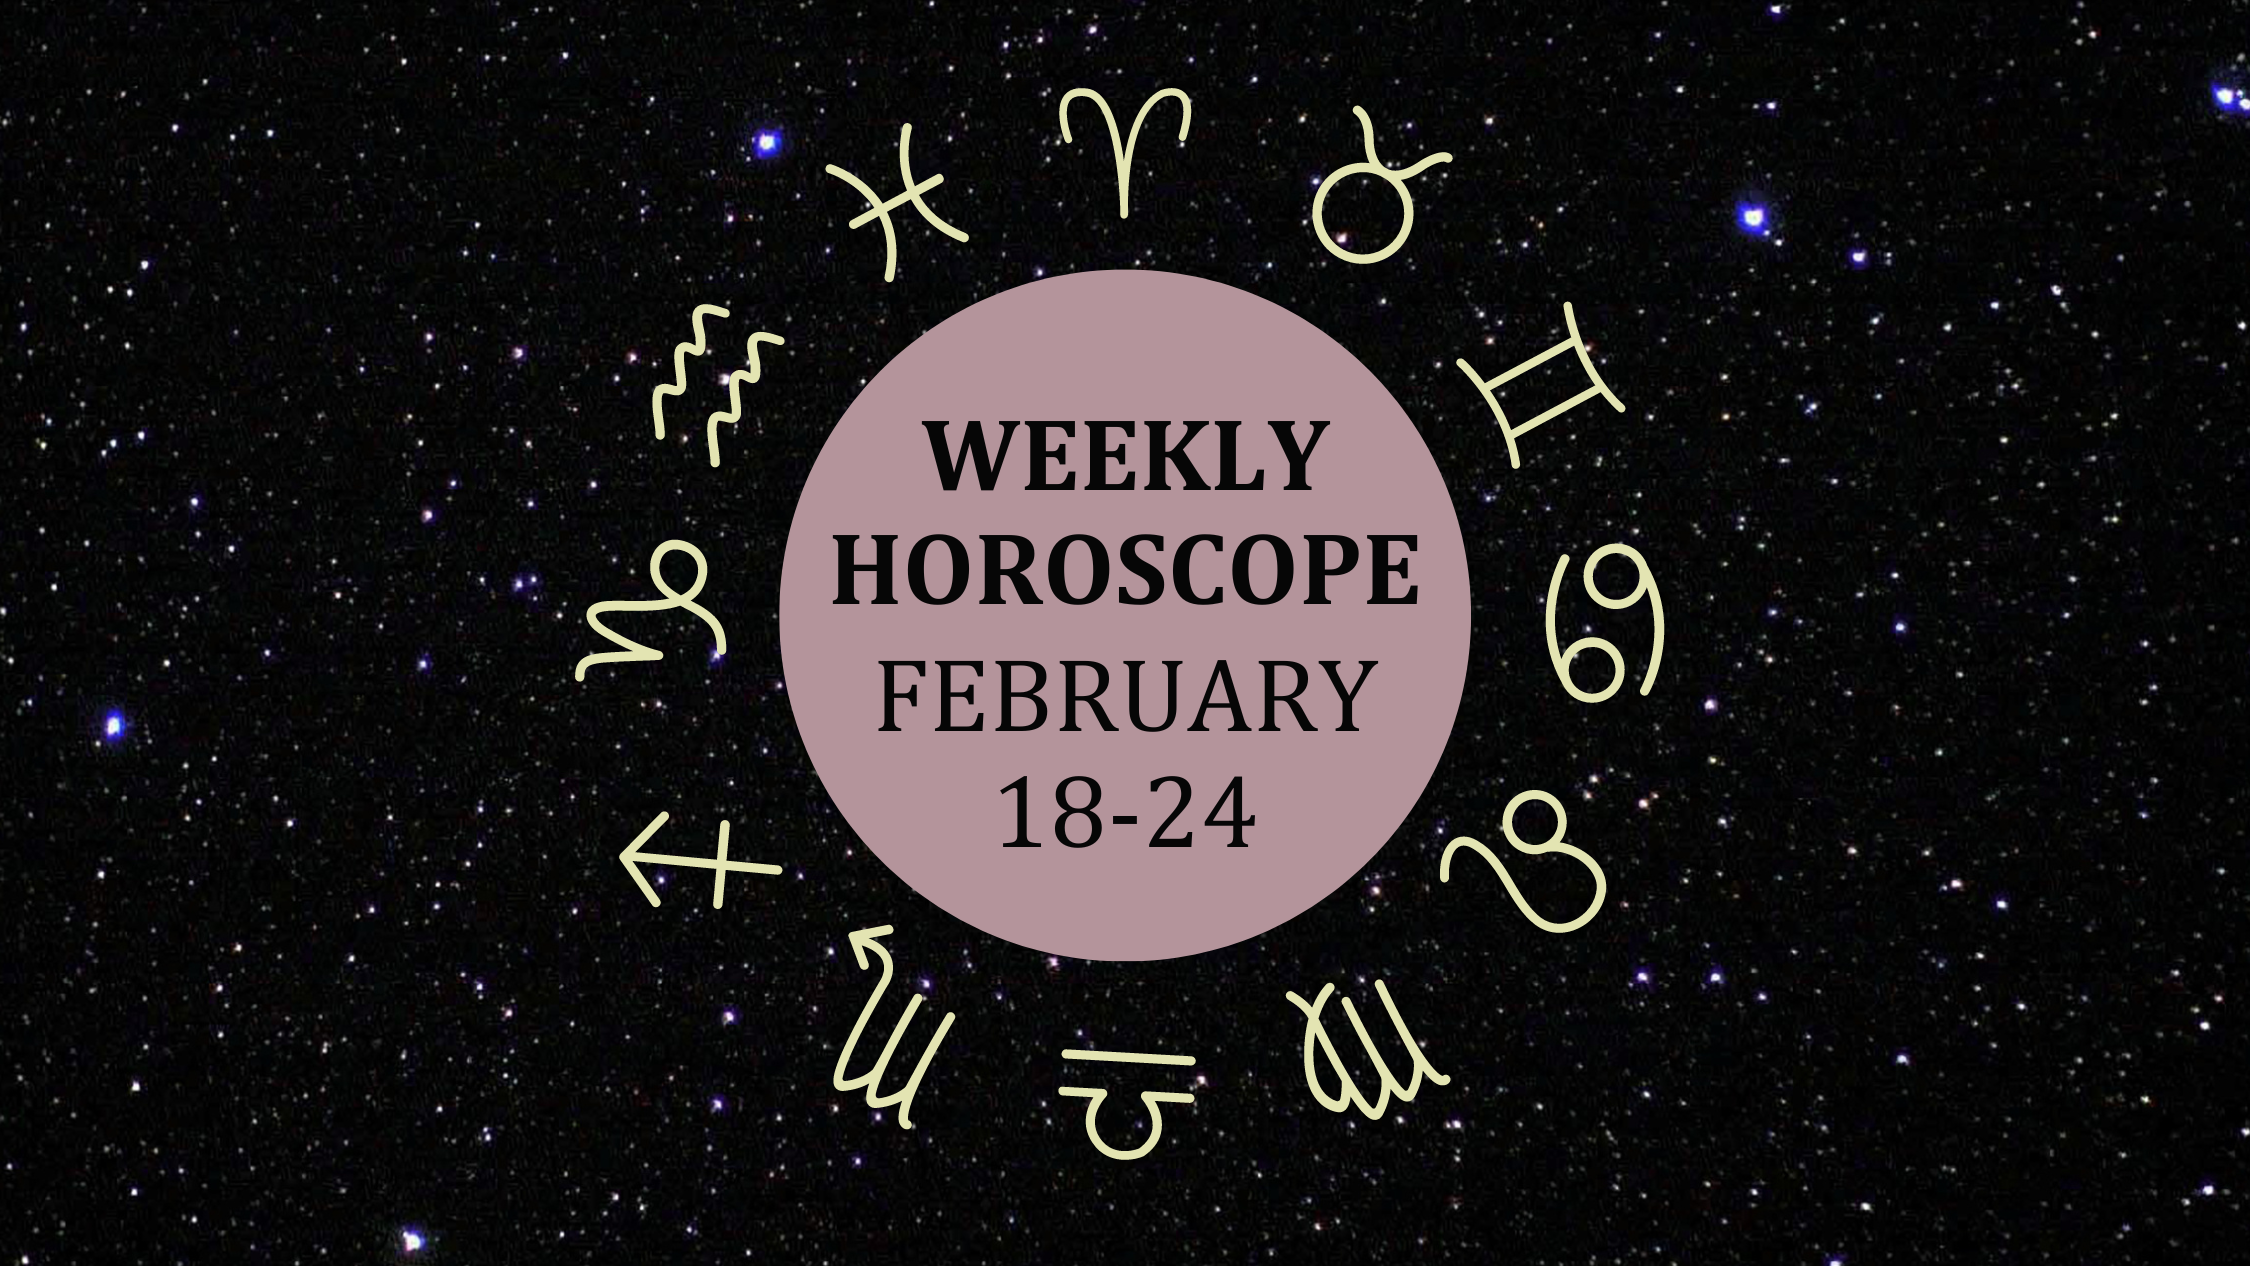 Zodiac wheel with text in the middle: "Weekly Horoscope: February 18-24"